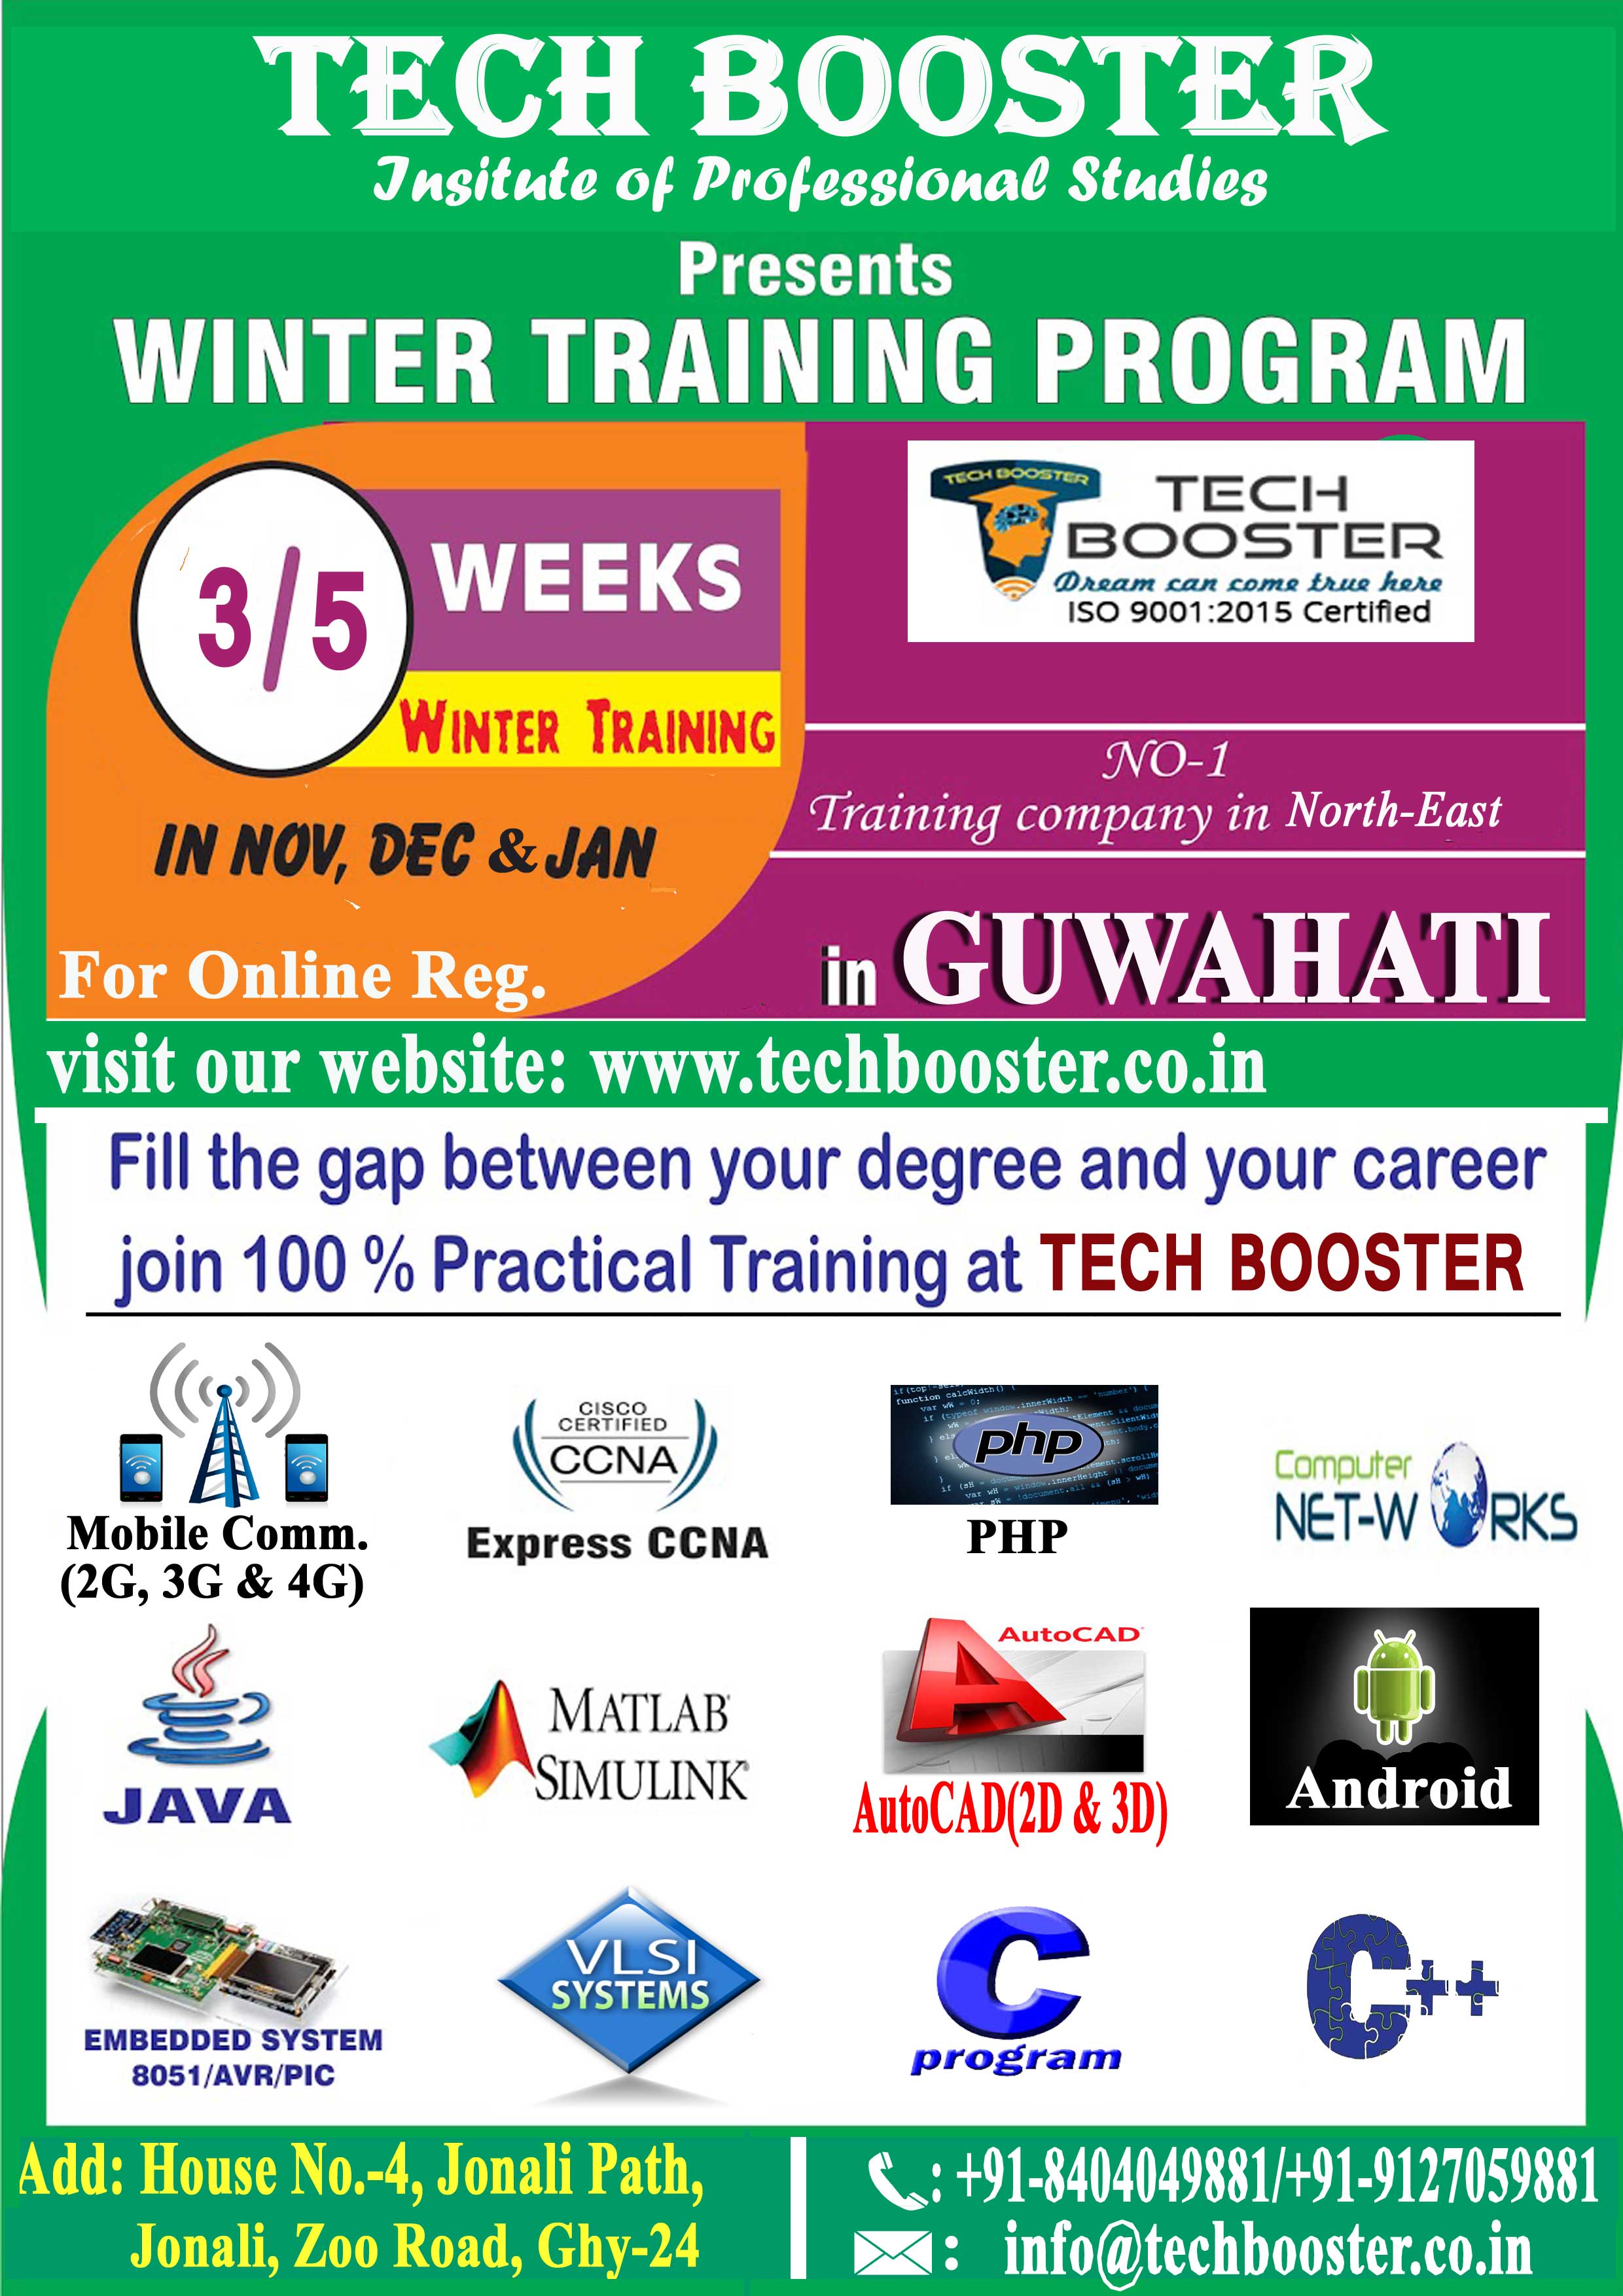 Winter Training from Tech Booster - Number 1 Professional Training Institute in Guwahati, North-East